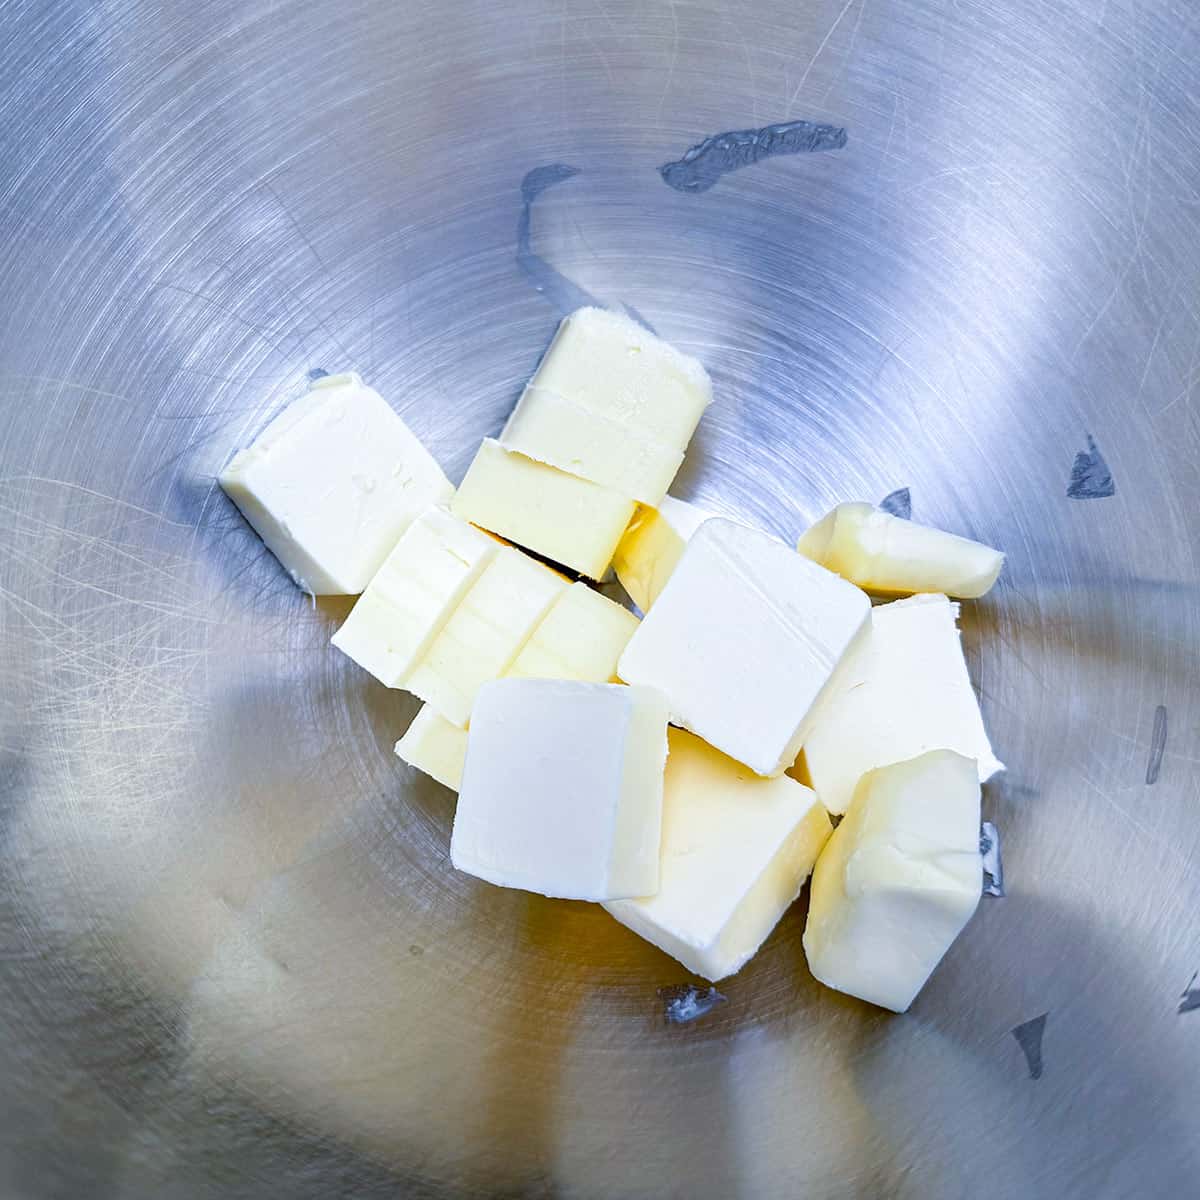 Butter cut into cubes and in a mixer bowl.